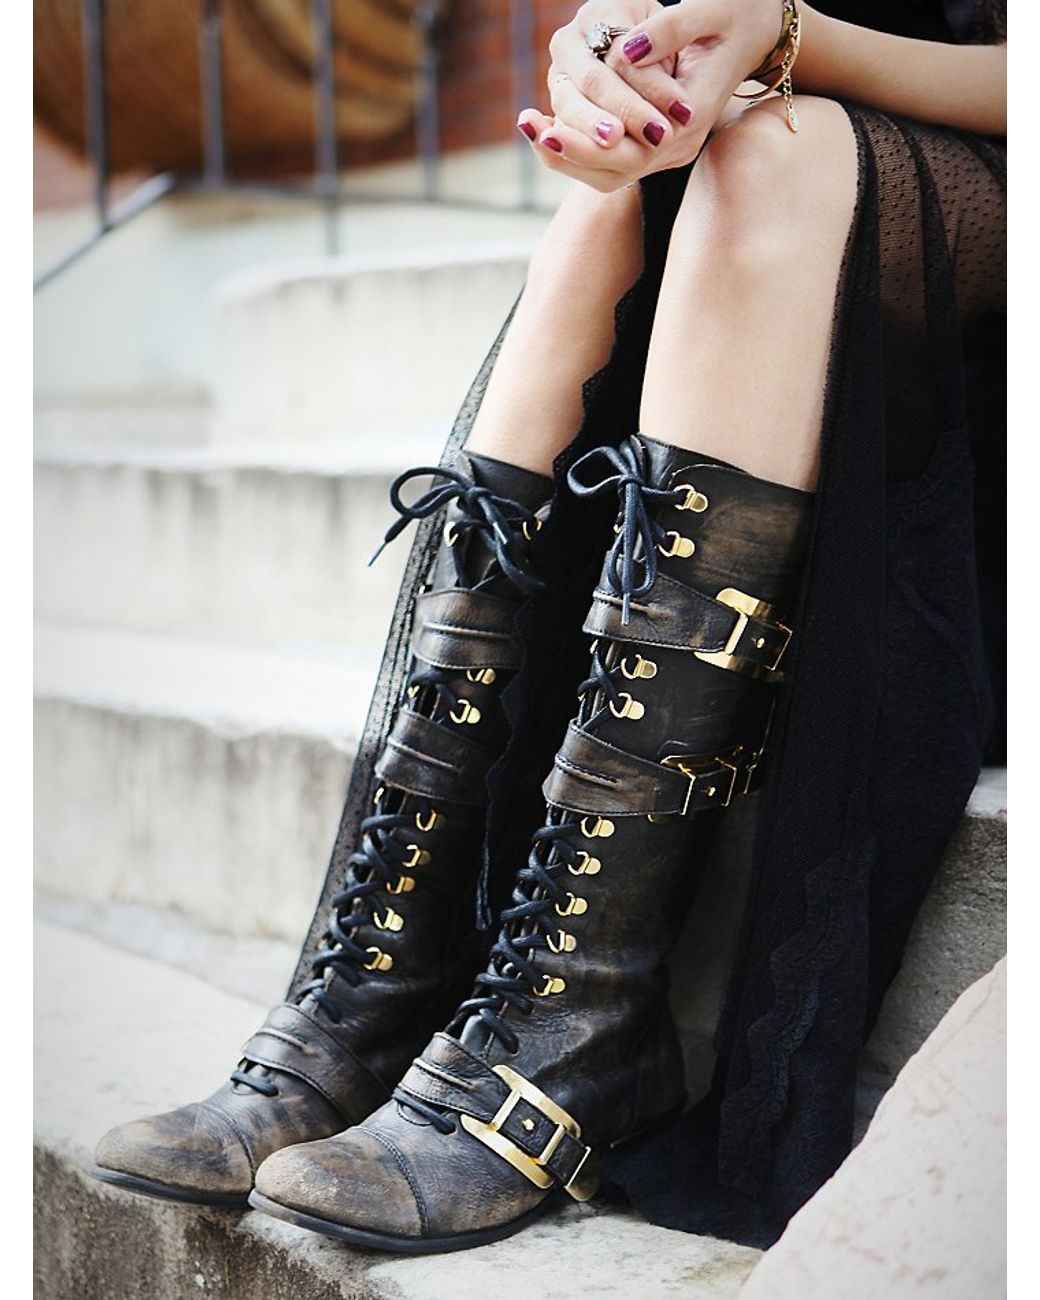 Free People Emmett Strap Lace-Up Boot 8 NEW